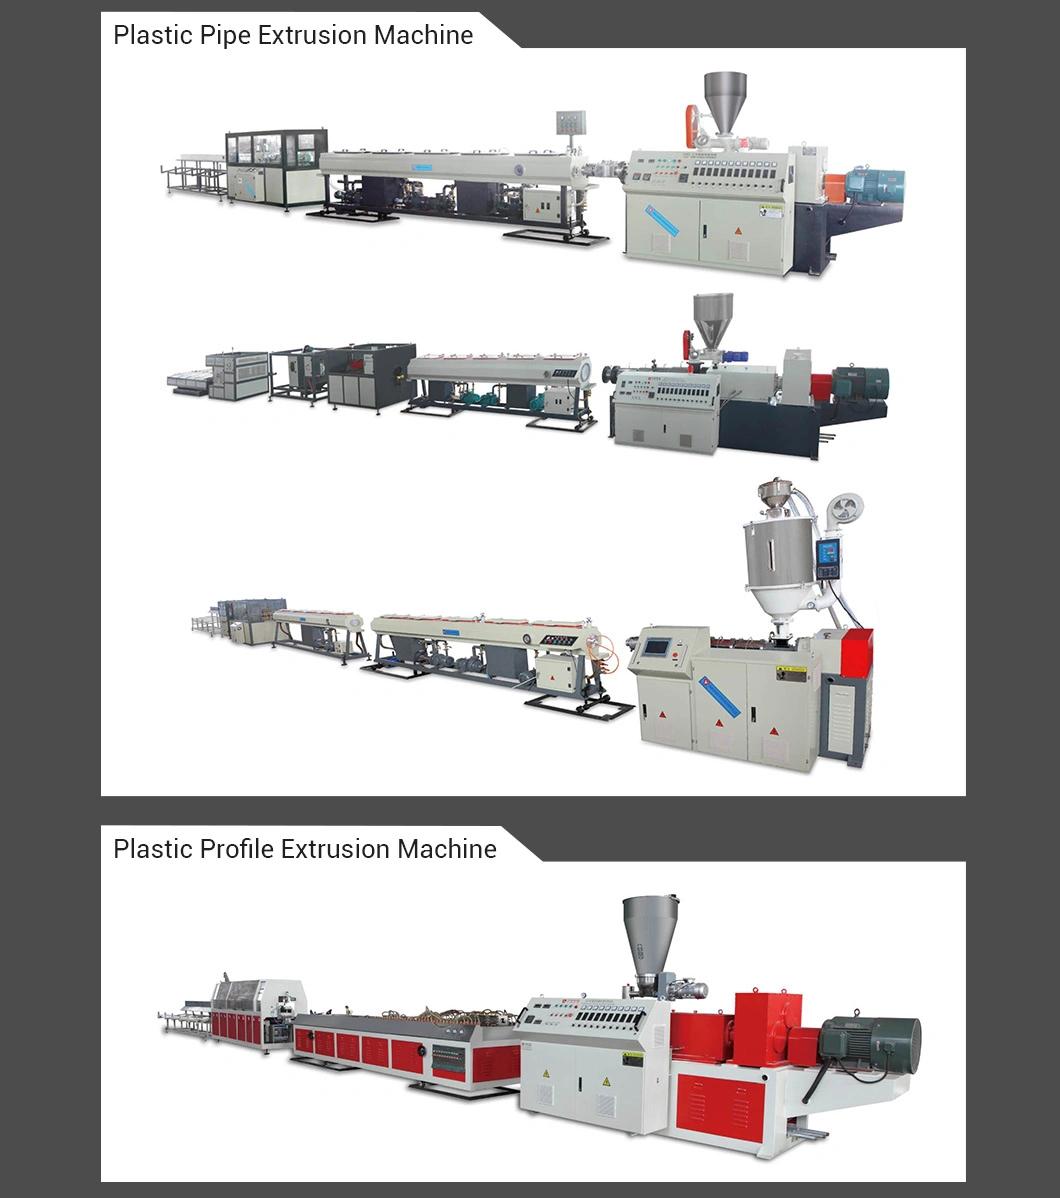 Yatong 300kg, 500kg, 1000kg Plastic Extrusion PE Film Cleaning Line